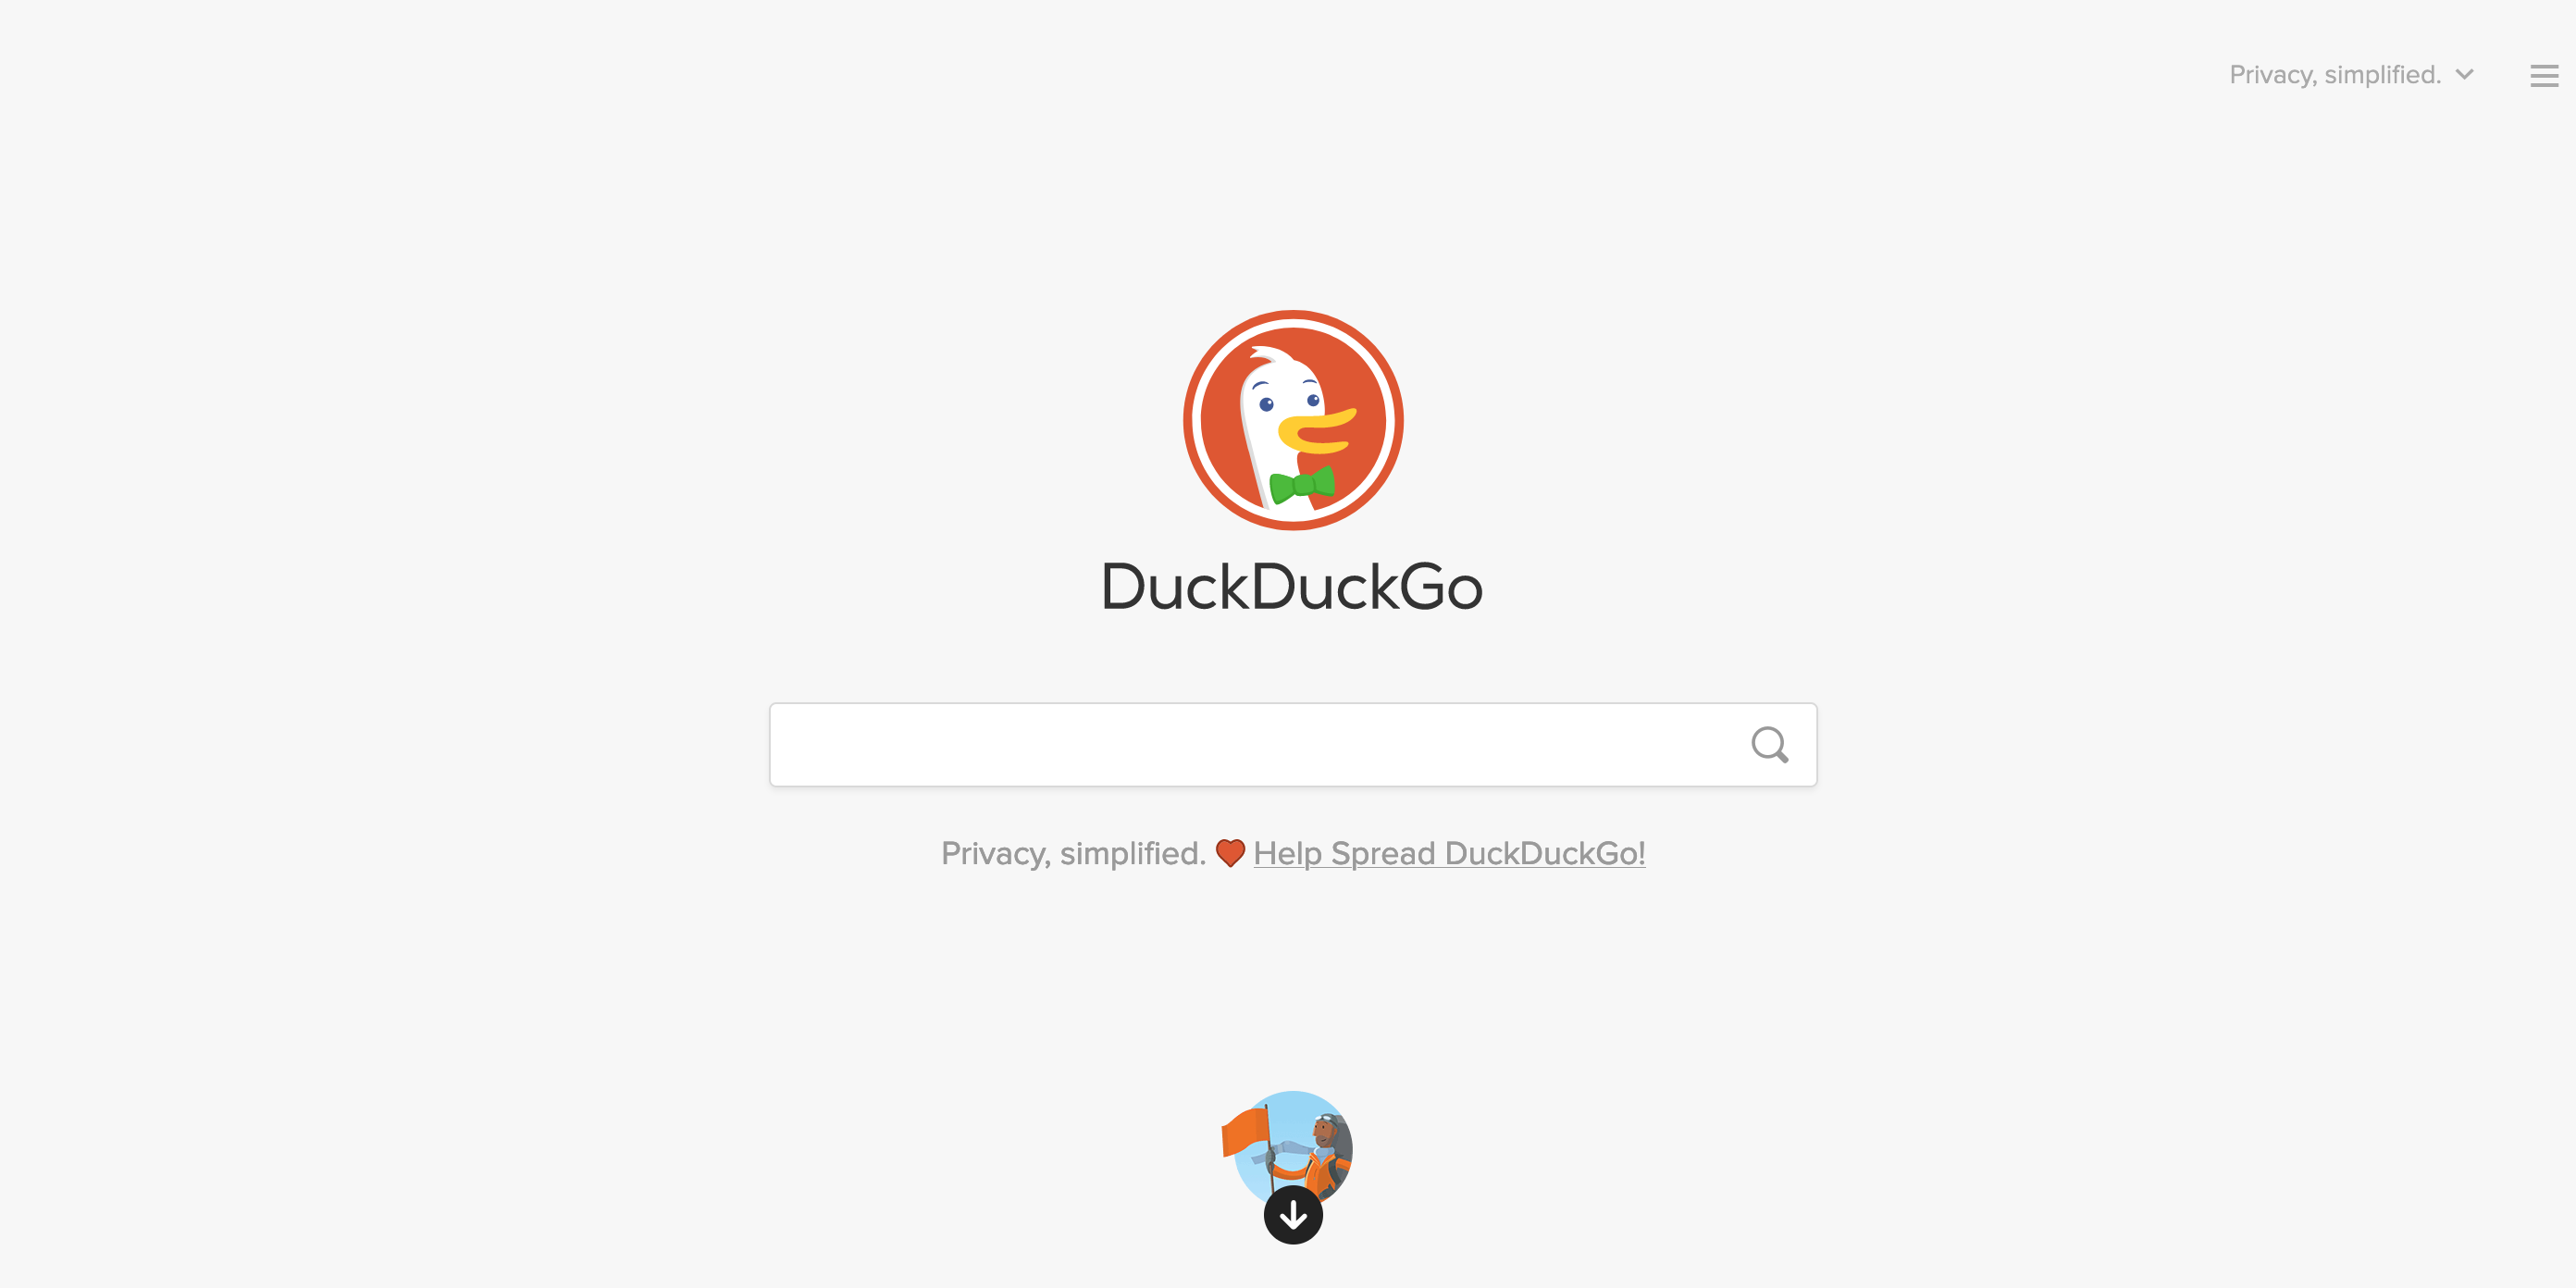 DuckDuckGo's onion site viewed using Tor browser